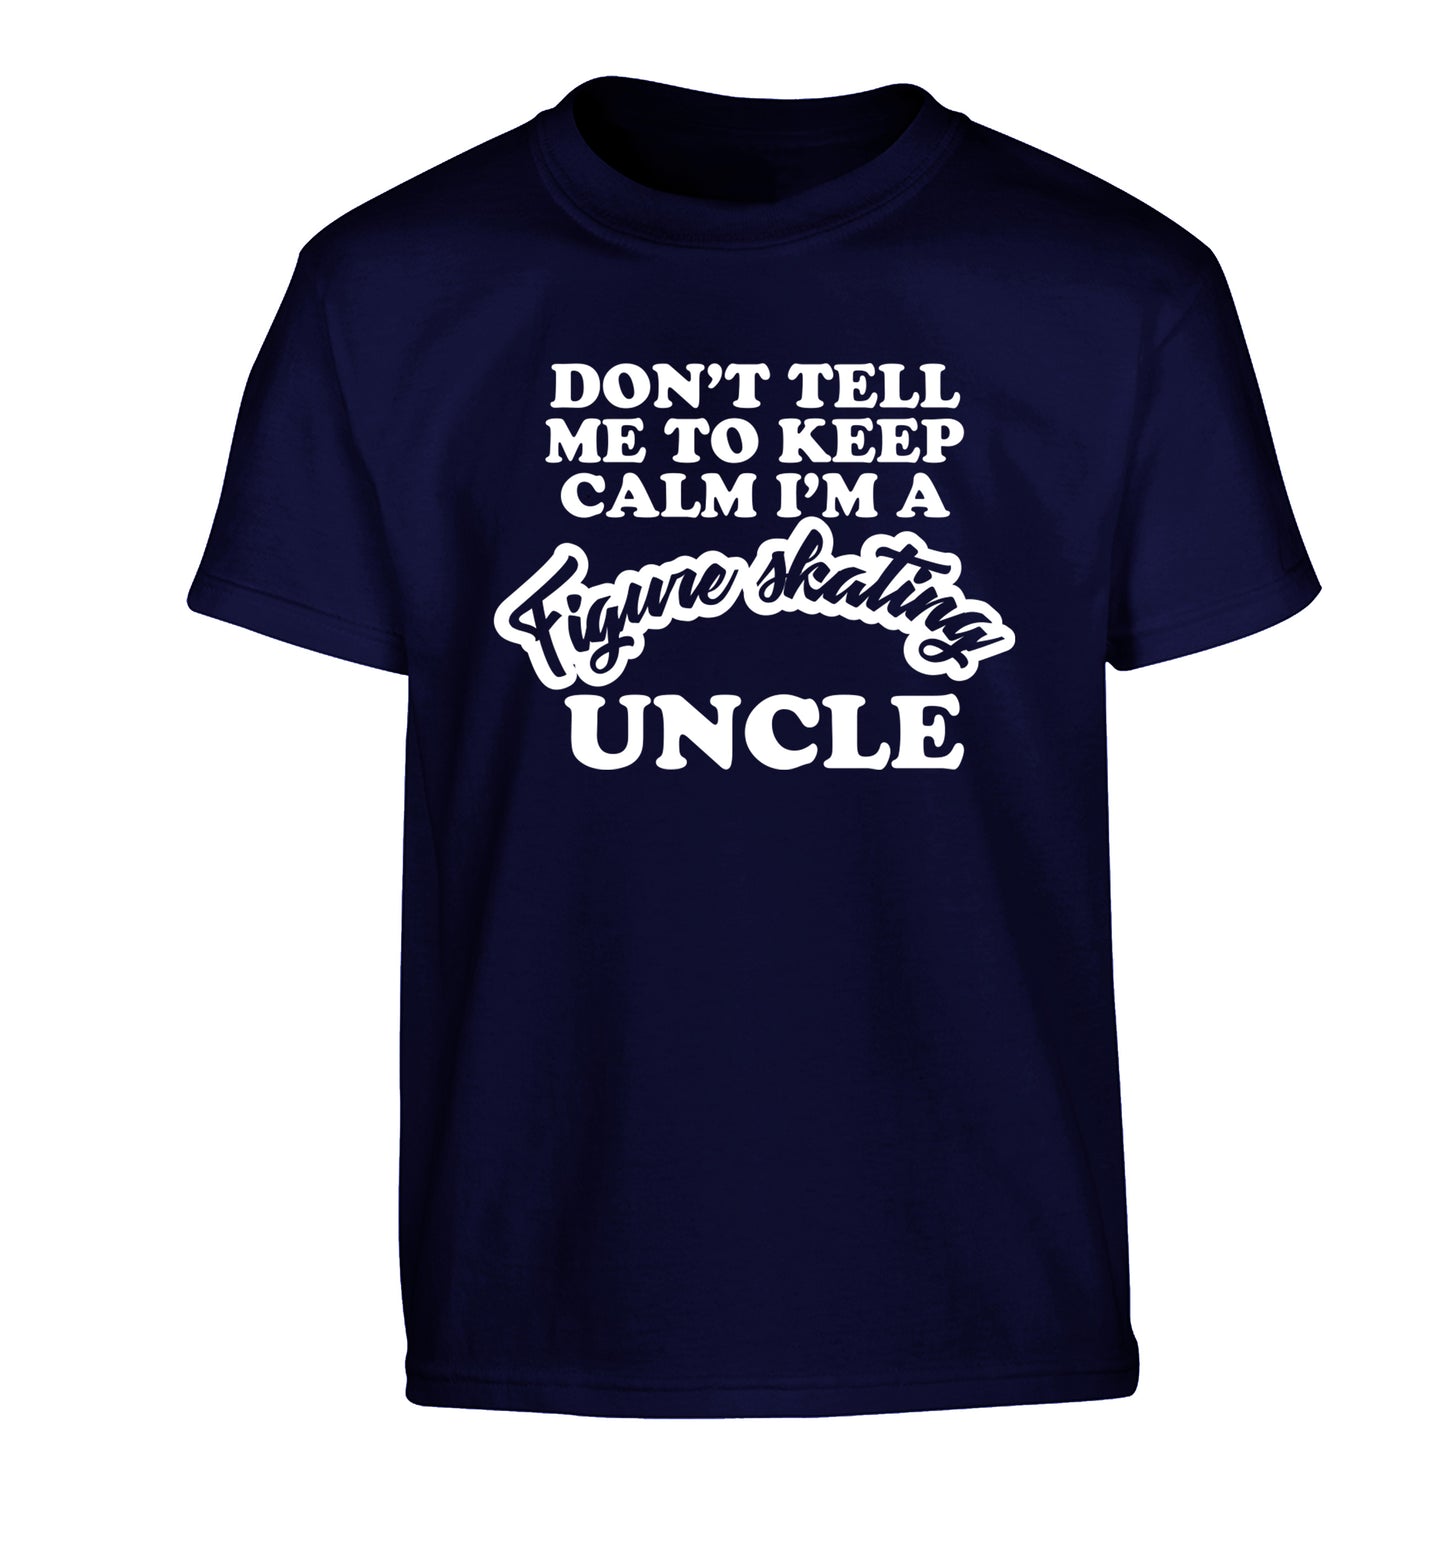 Don't tell me to keep calm I'm a figure skating uncle Children's navy Tshirt 12-14 Years